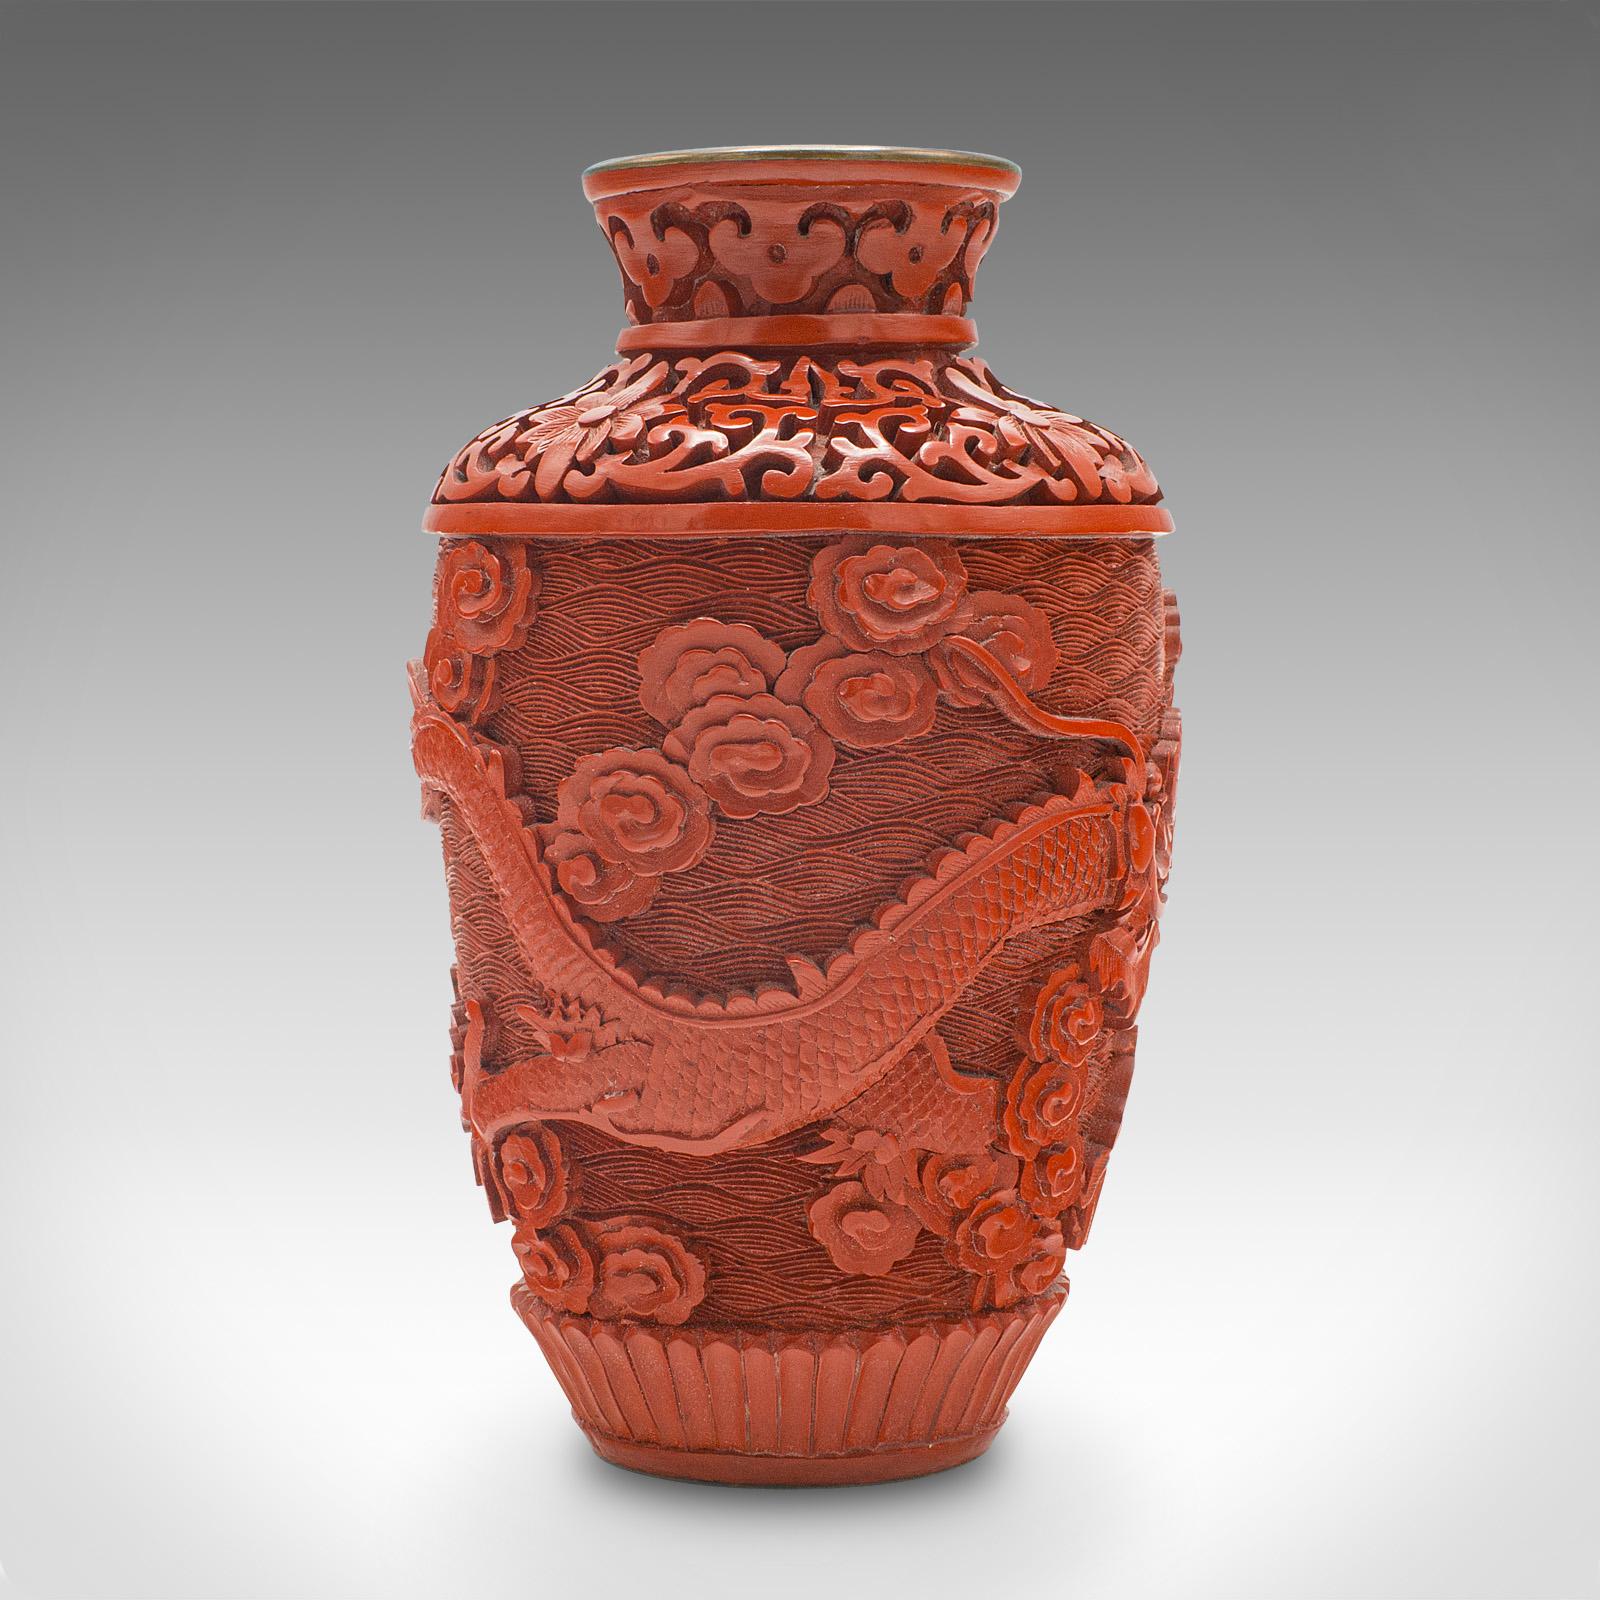 Chinese Export Small Vintage Cinnabar Posy Vase, Chinese Decorative Urn, Cloisonne, Mid-Century